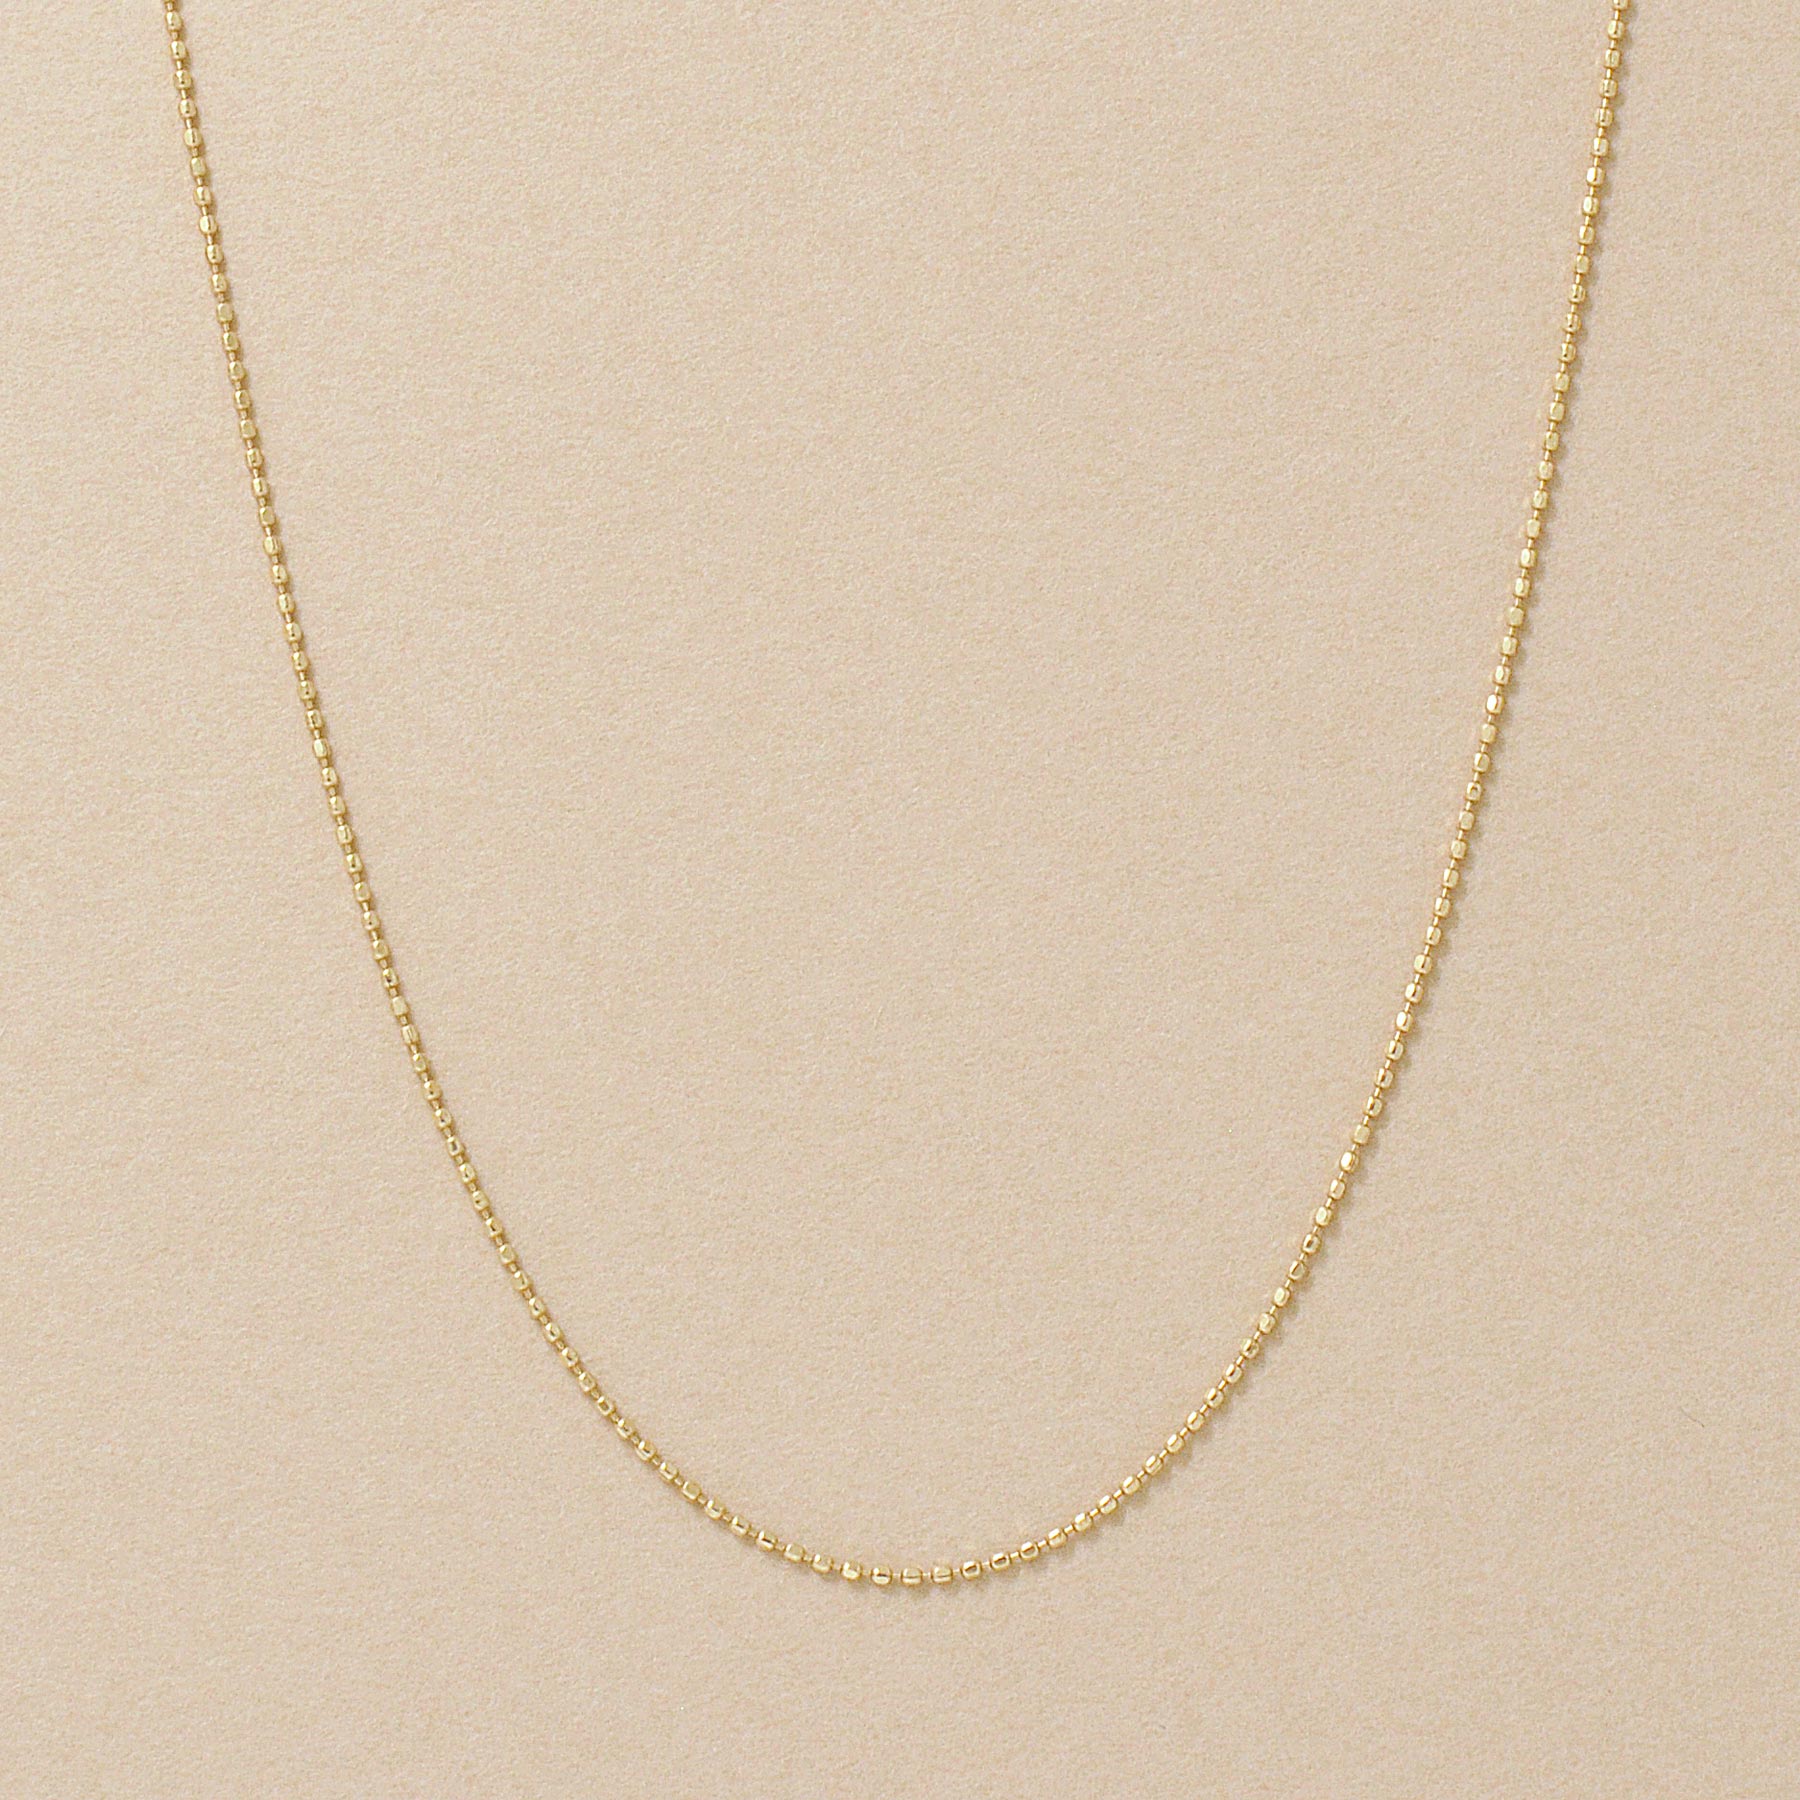 10K Cut Ball Chain Necklace 50cm (Yellow Gold) - Product Image